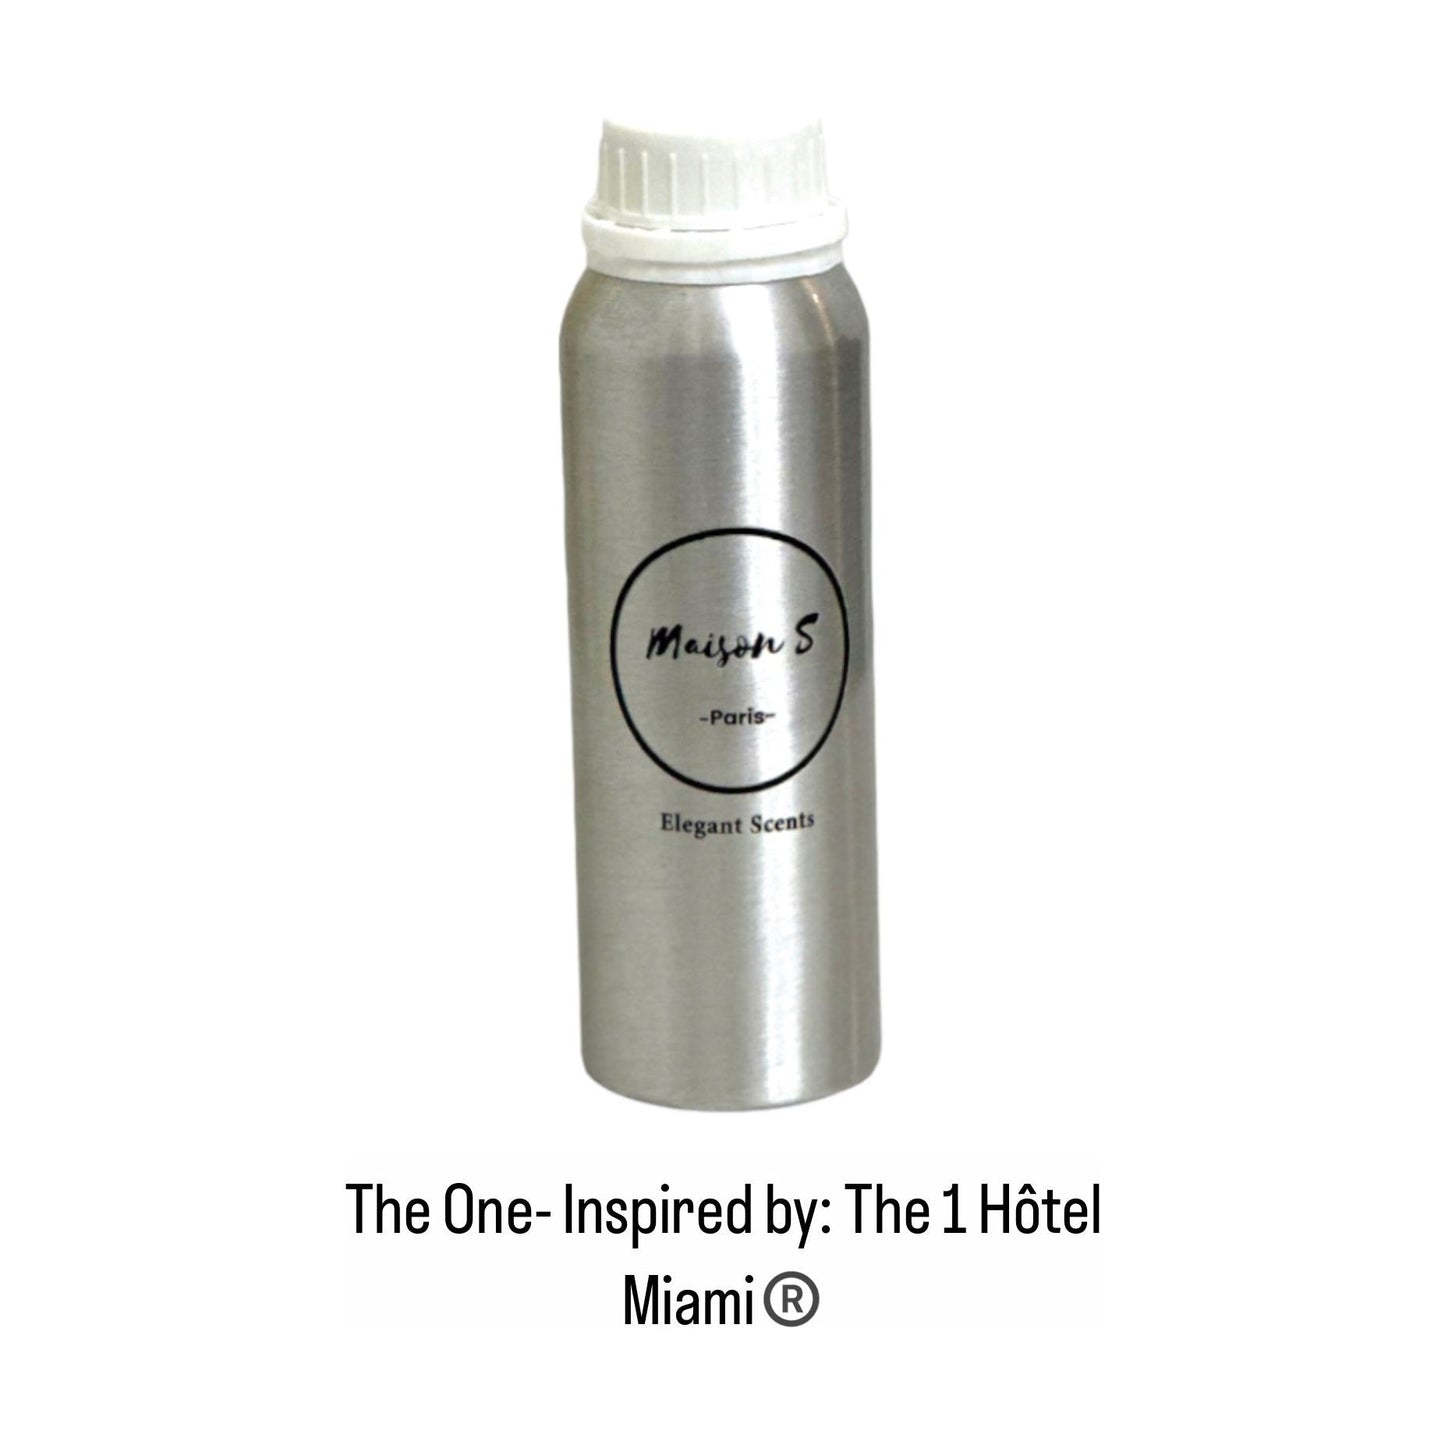 The one- Inspired by the 1 Hotel, Miami